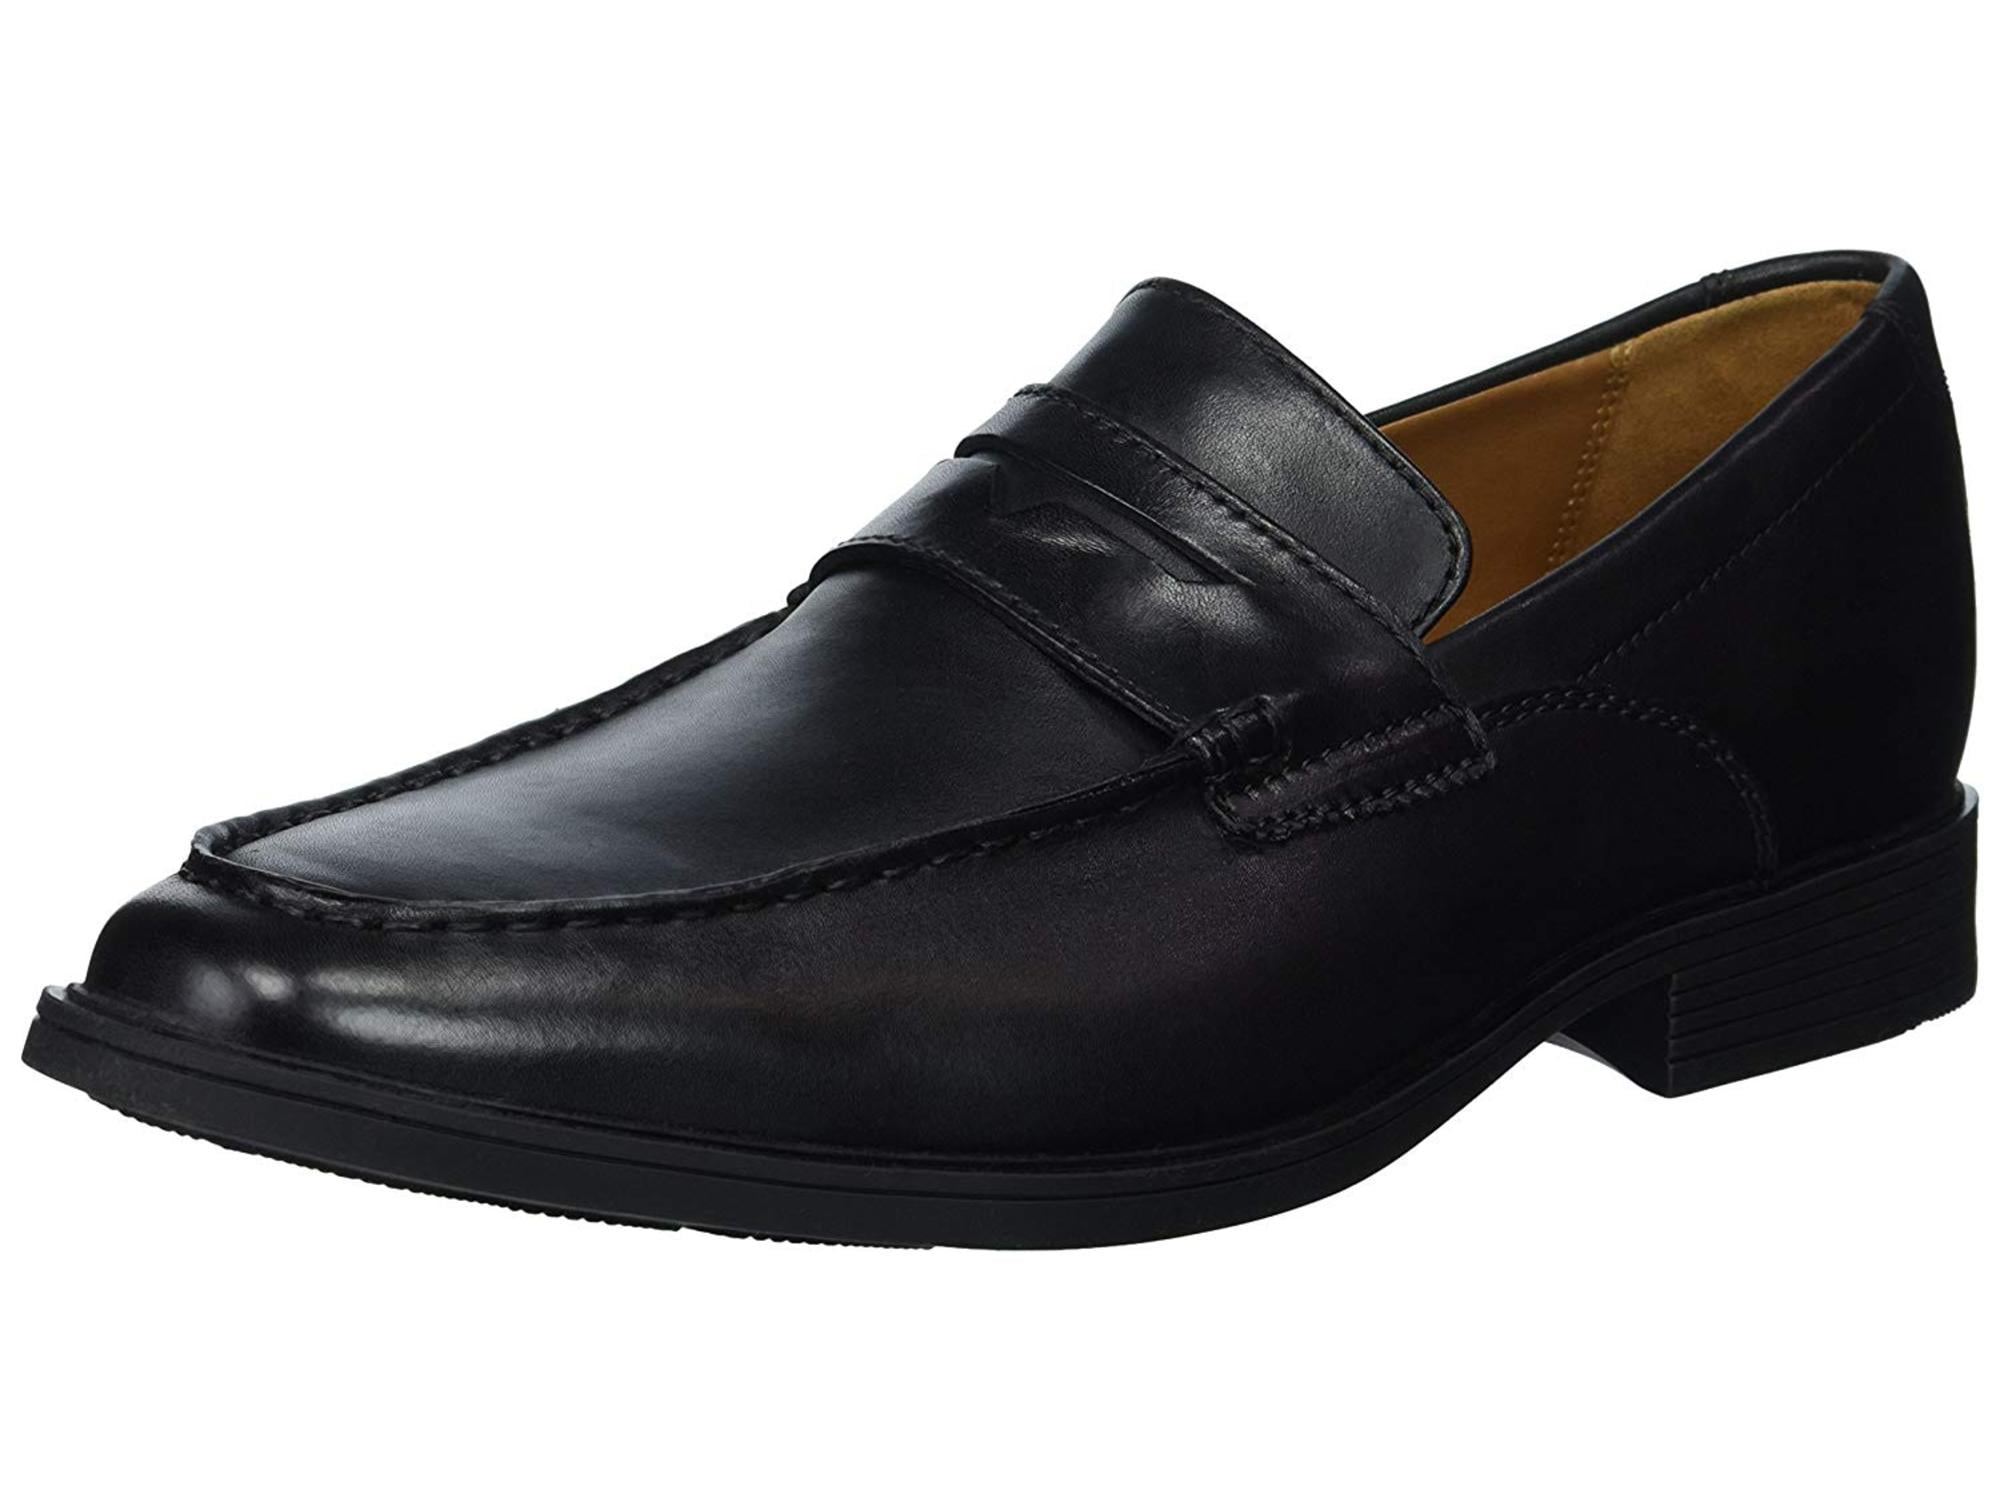 clarks loafers canada